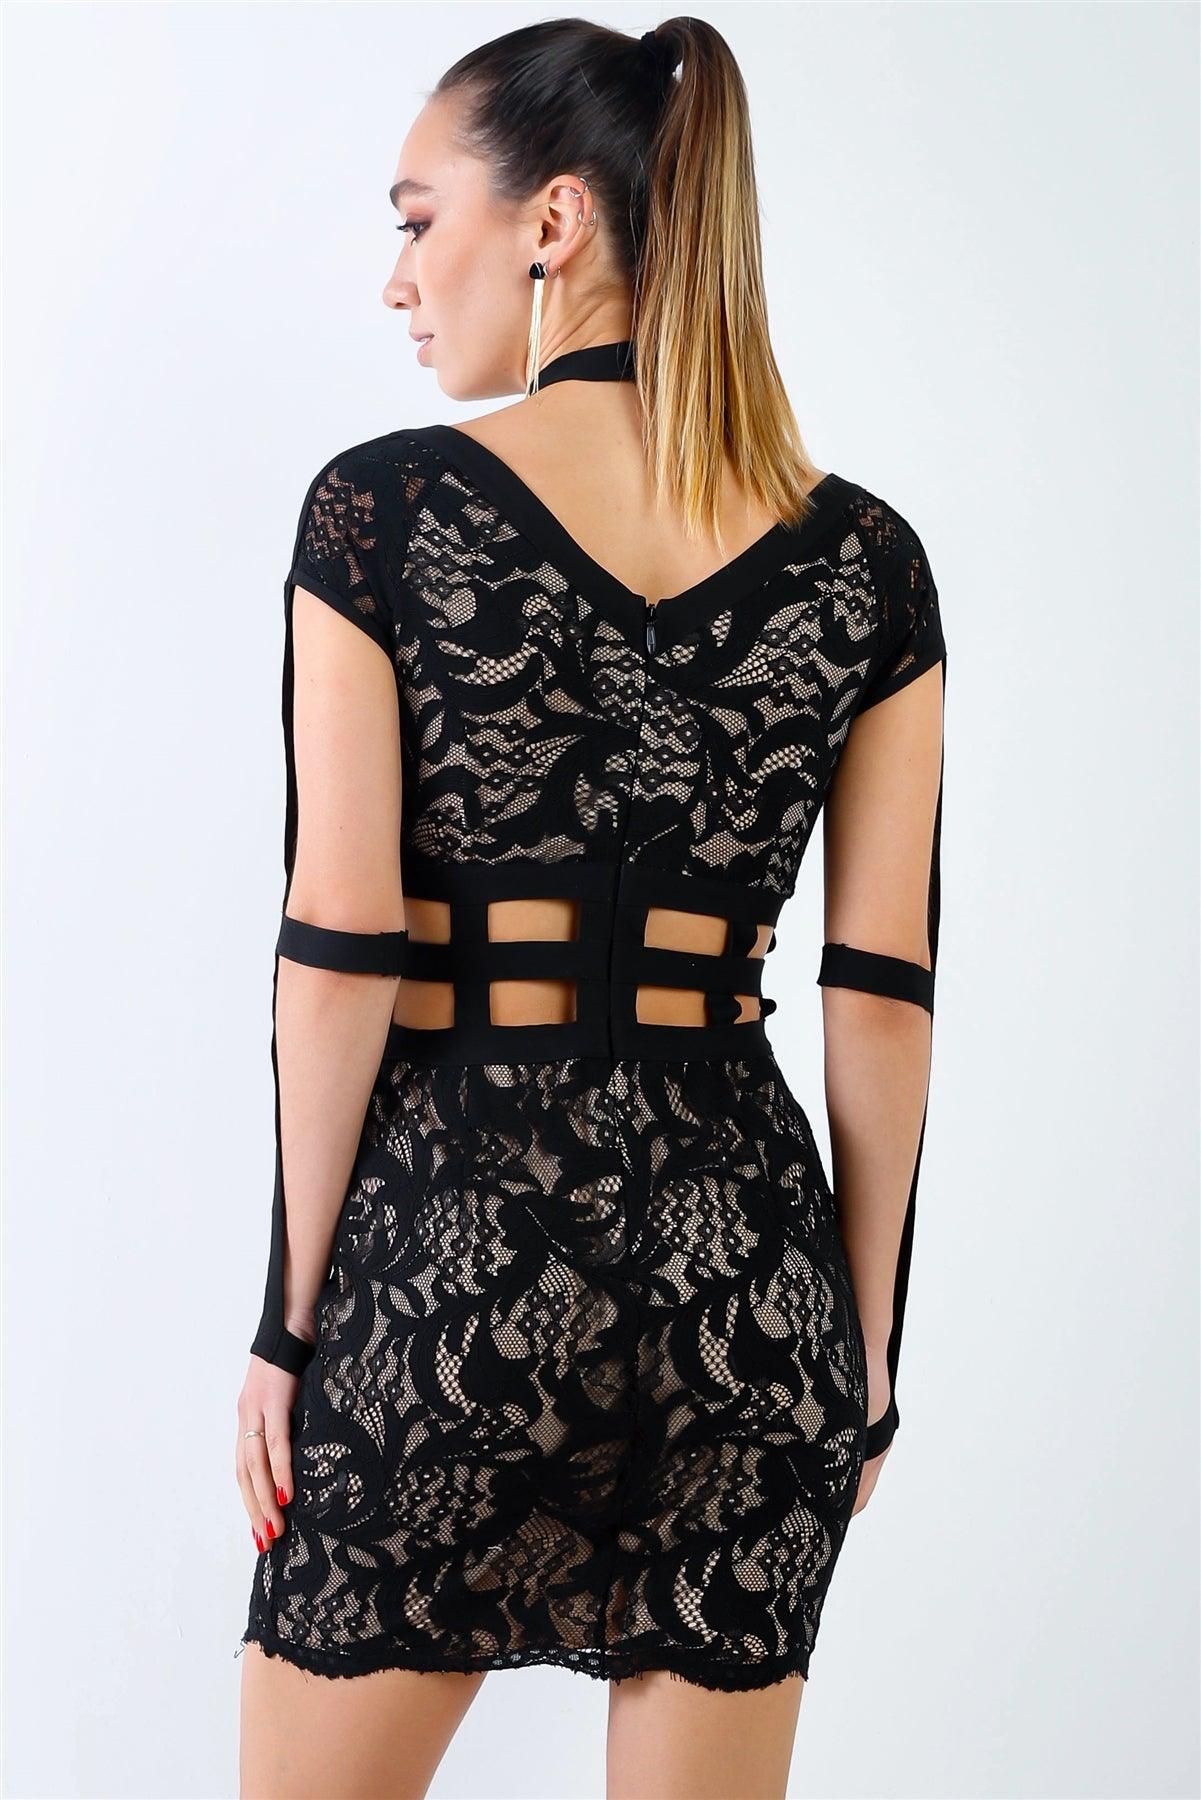 Black Lace With Nude Lining Elastic Harness Mini Dress /3-2-1